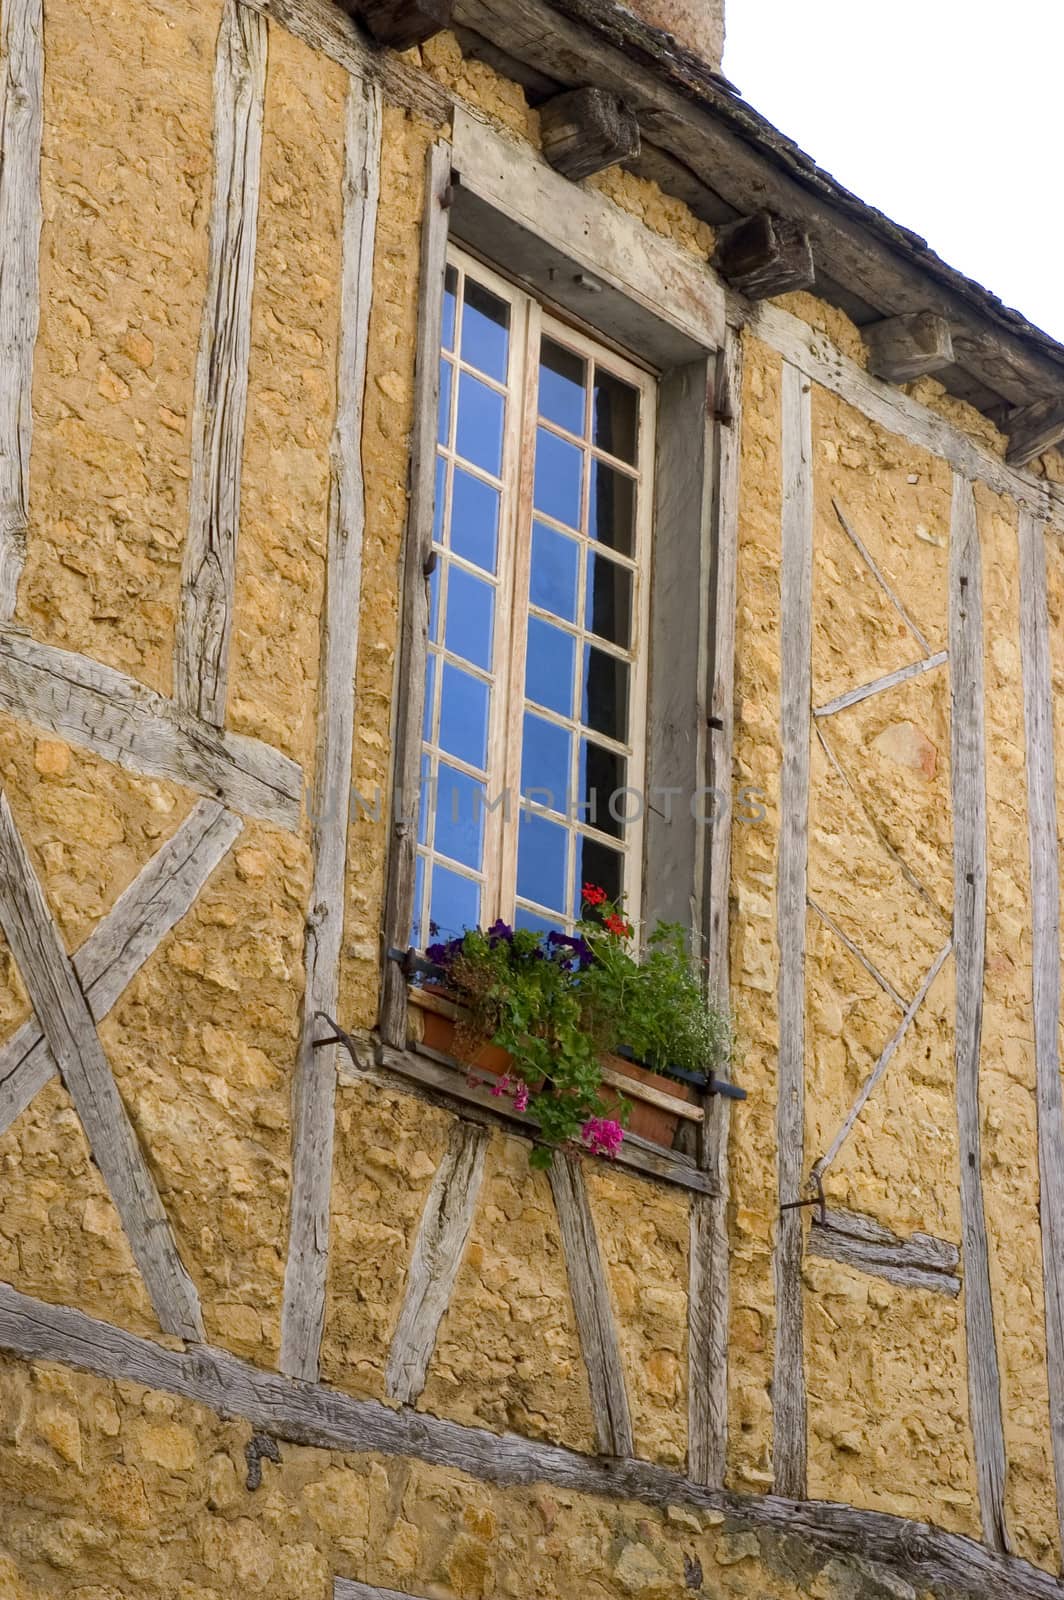 A window of an old building in the center of Sarlat by gillespaire